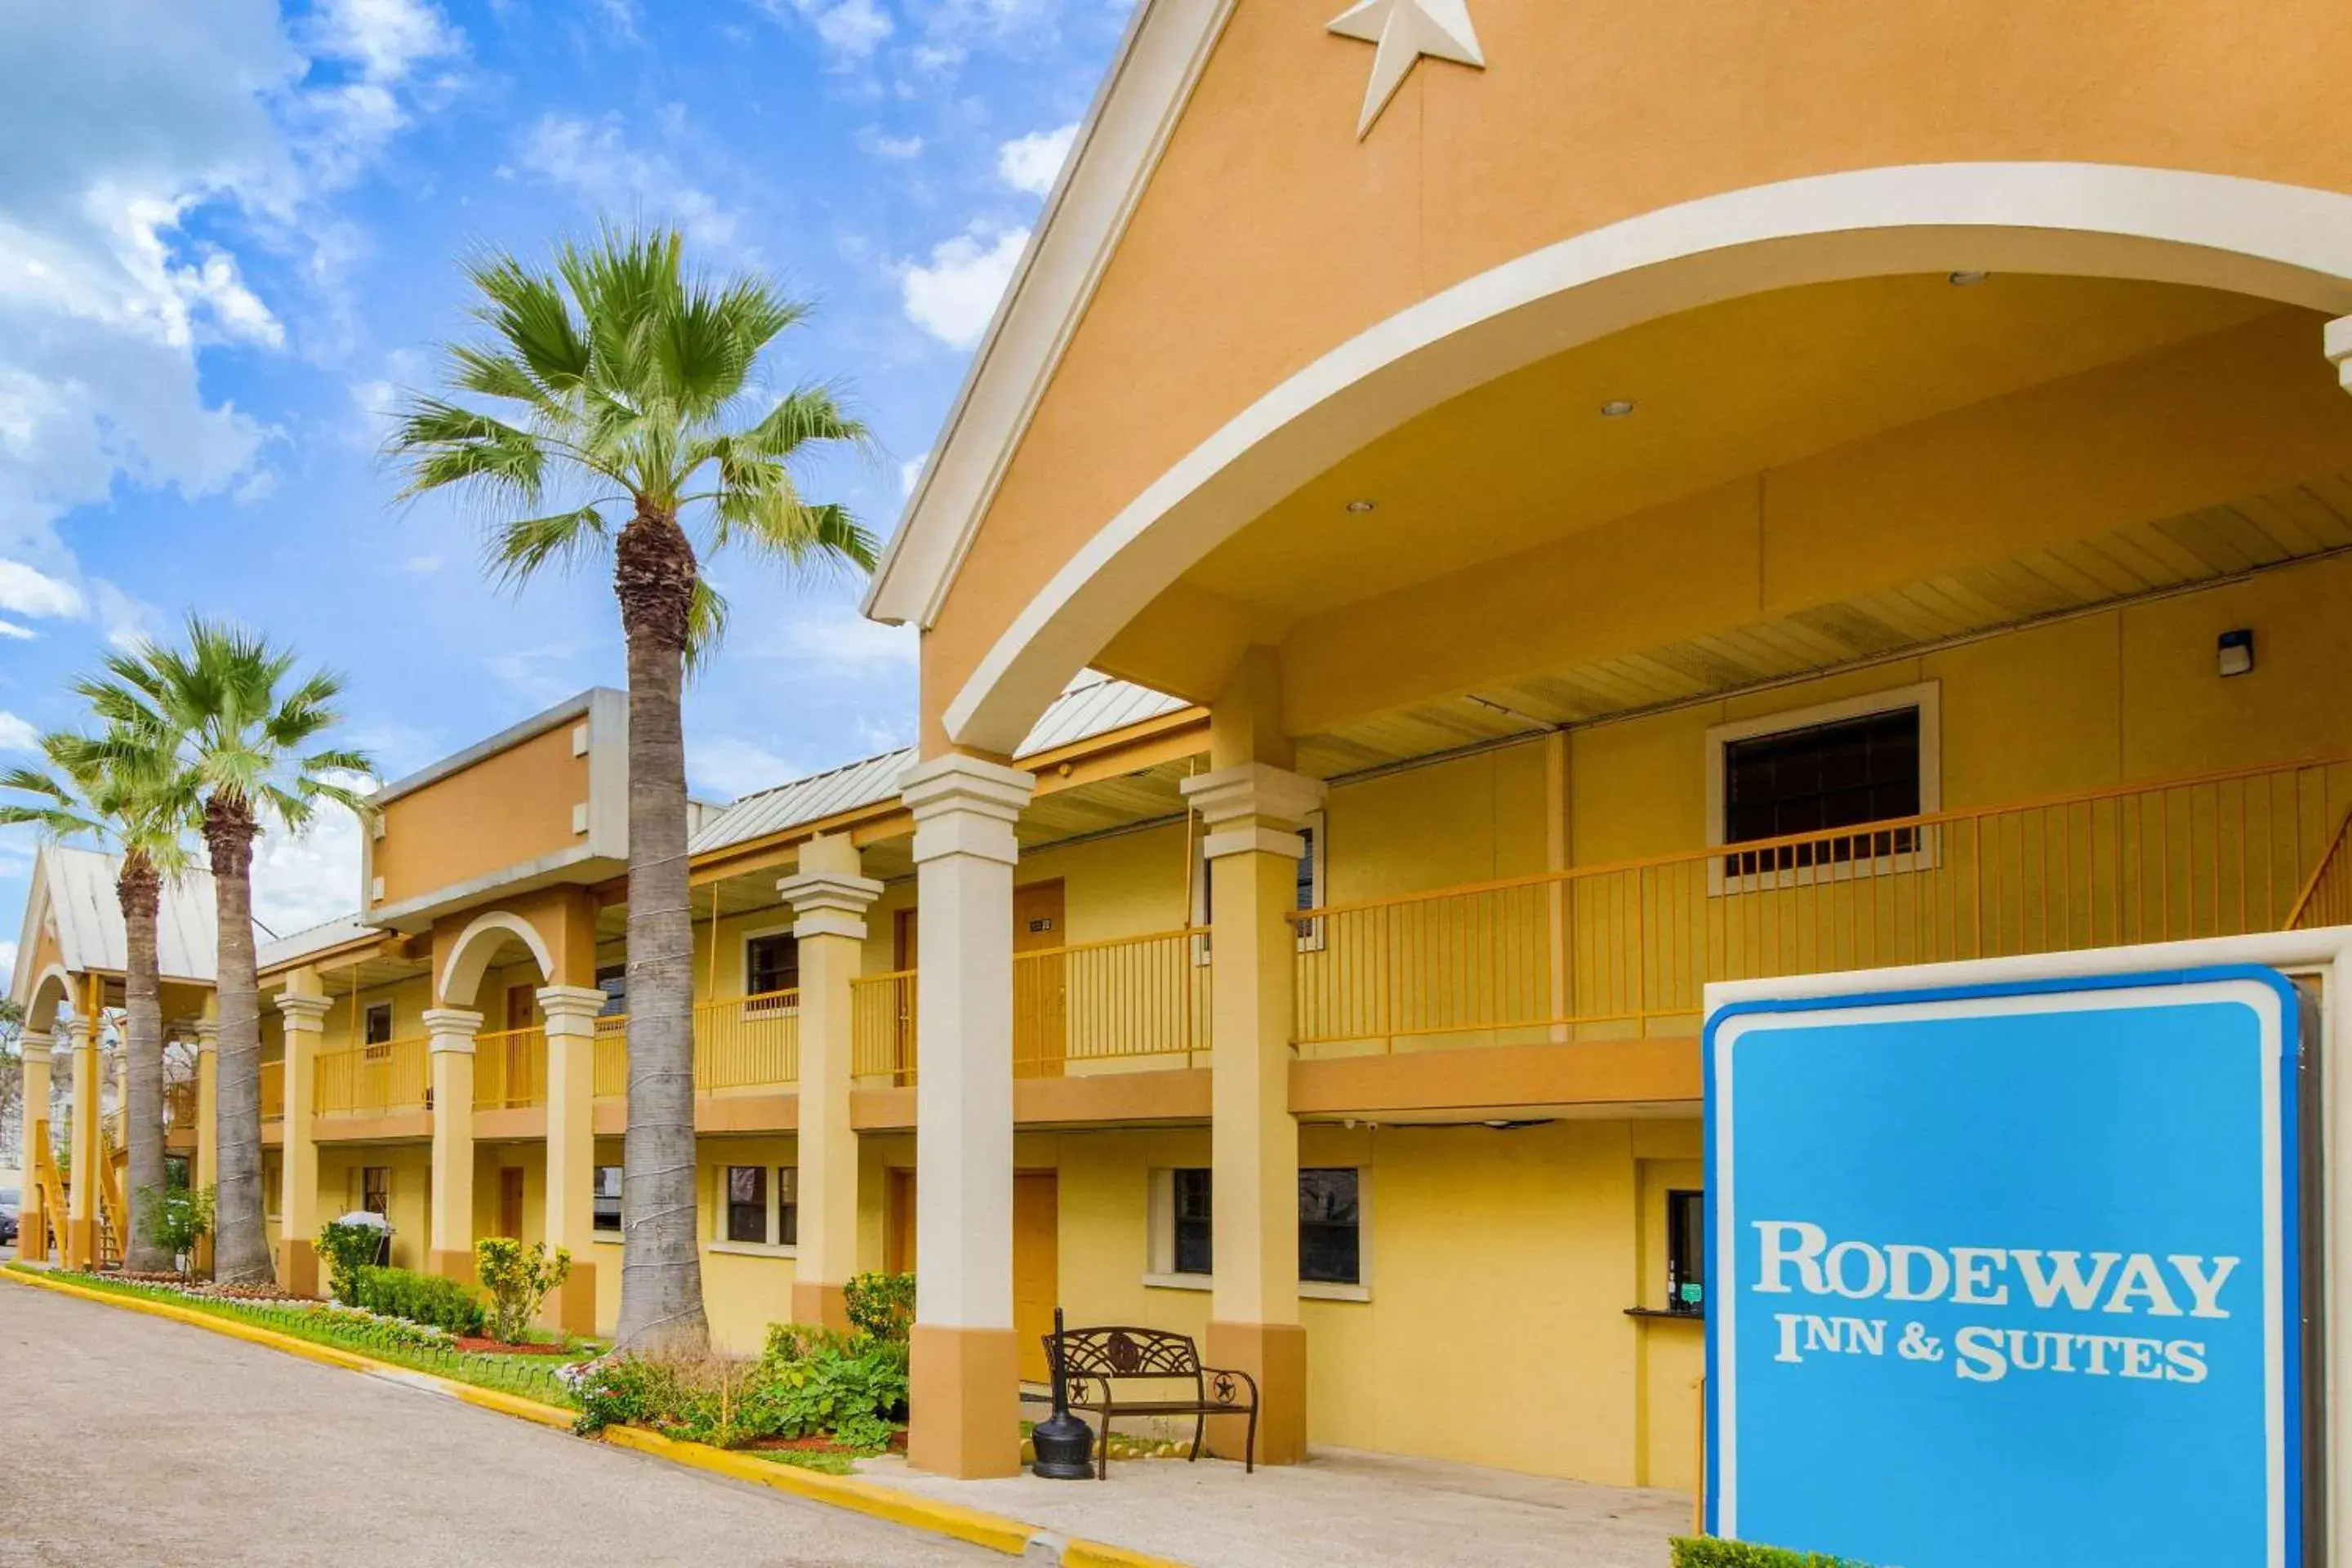 Property building in Rodeway Inn & Suites Houston near Medical Center